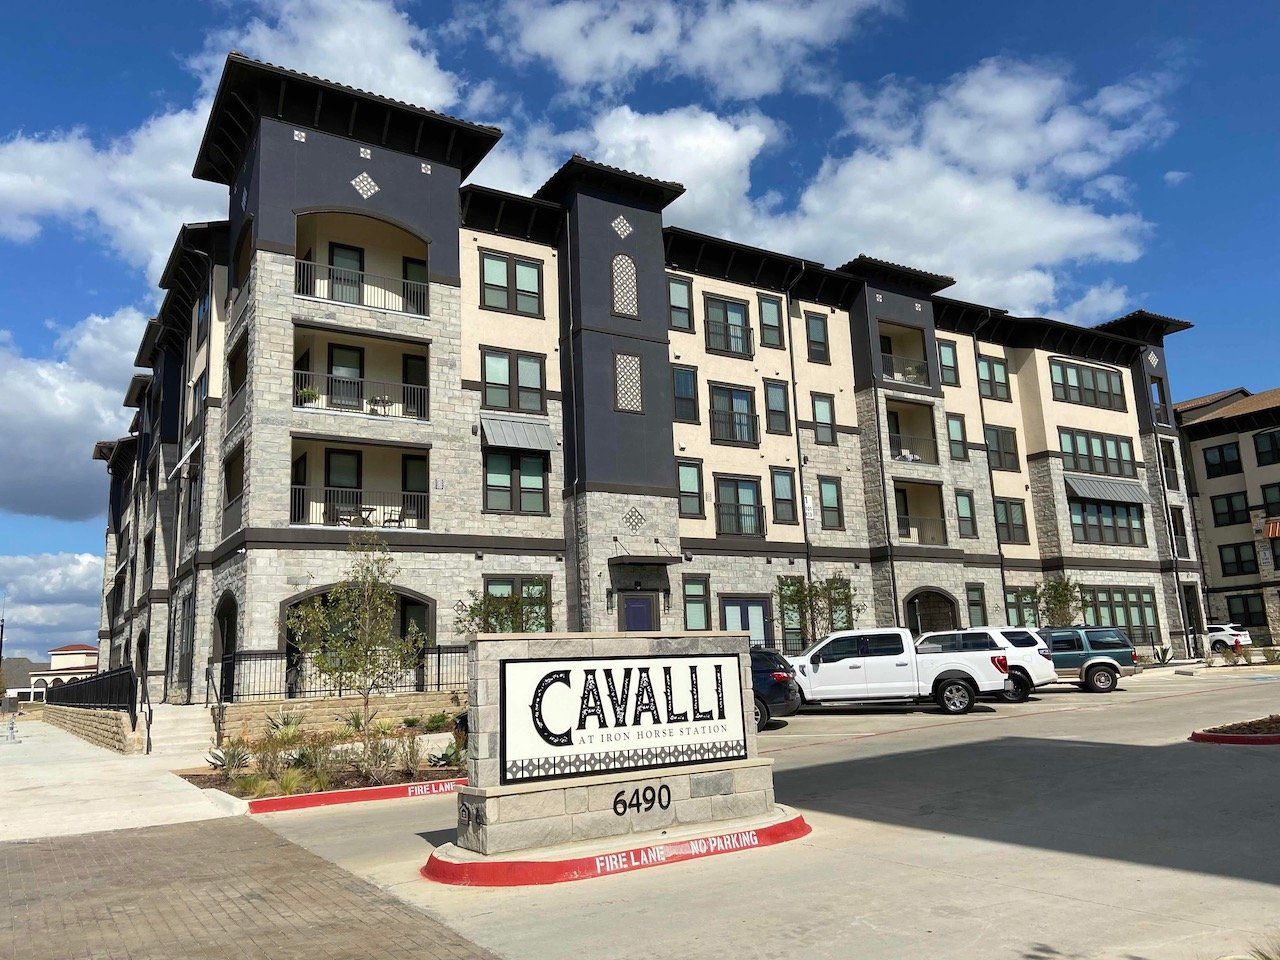 cavalli at iron horse front entrance and signage